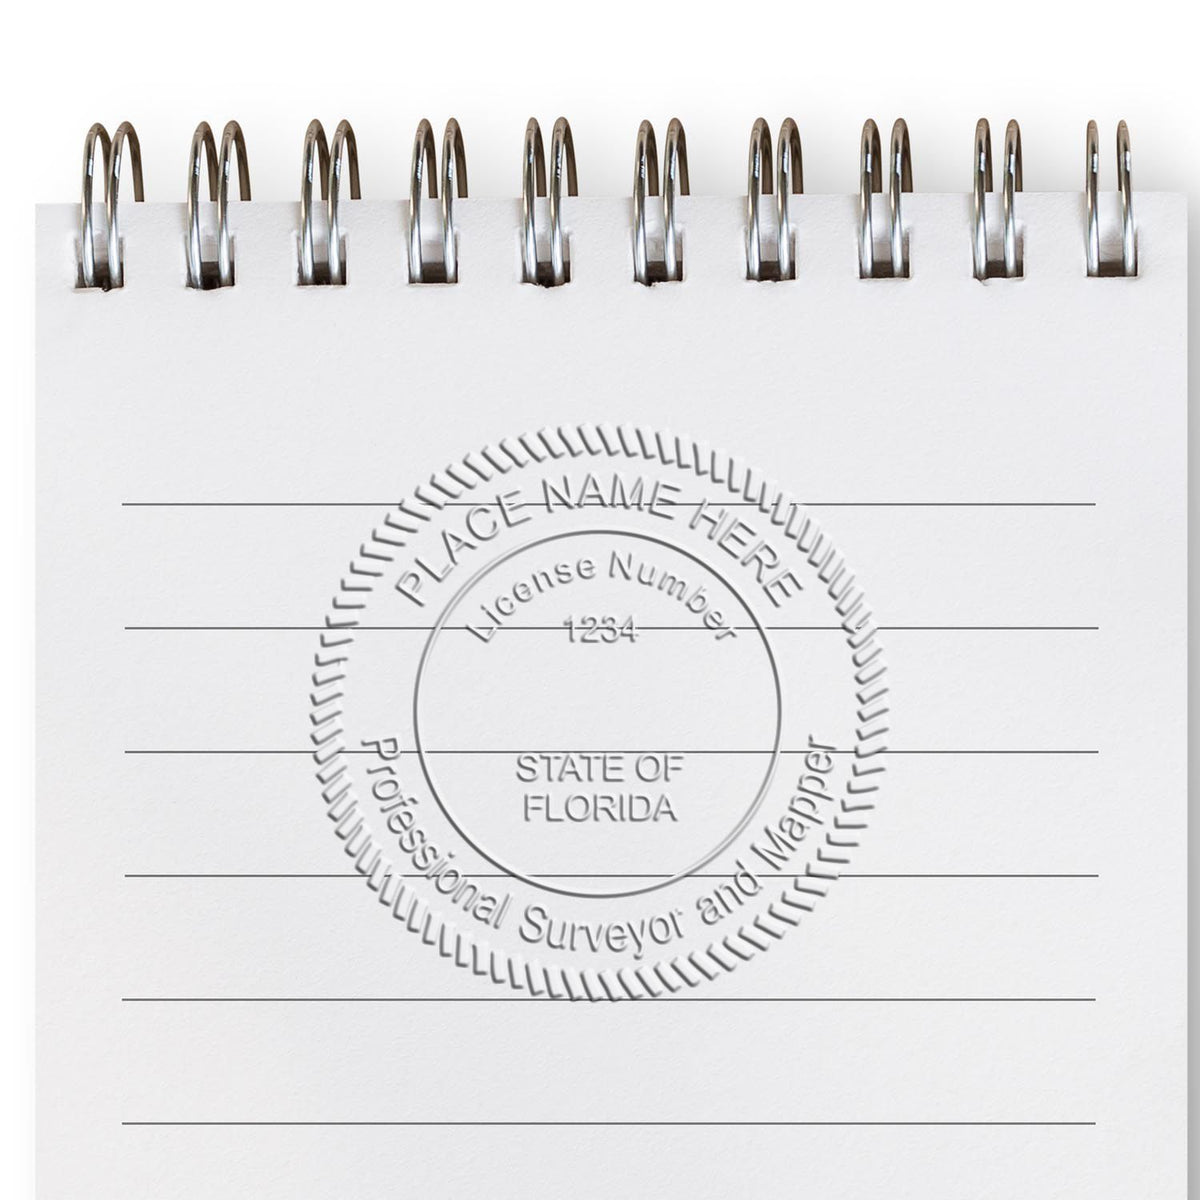 An in use photo of the Gift Florida Land Surveyor Seal showing a sample imprint on a cardstock